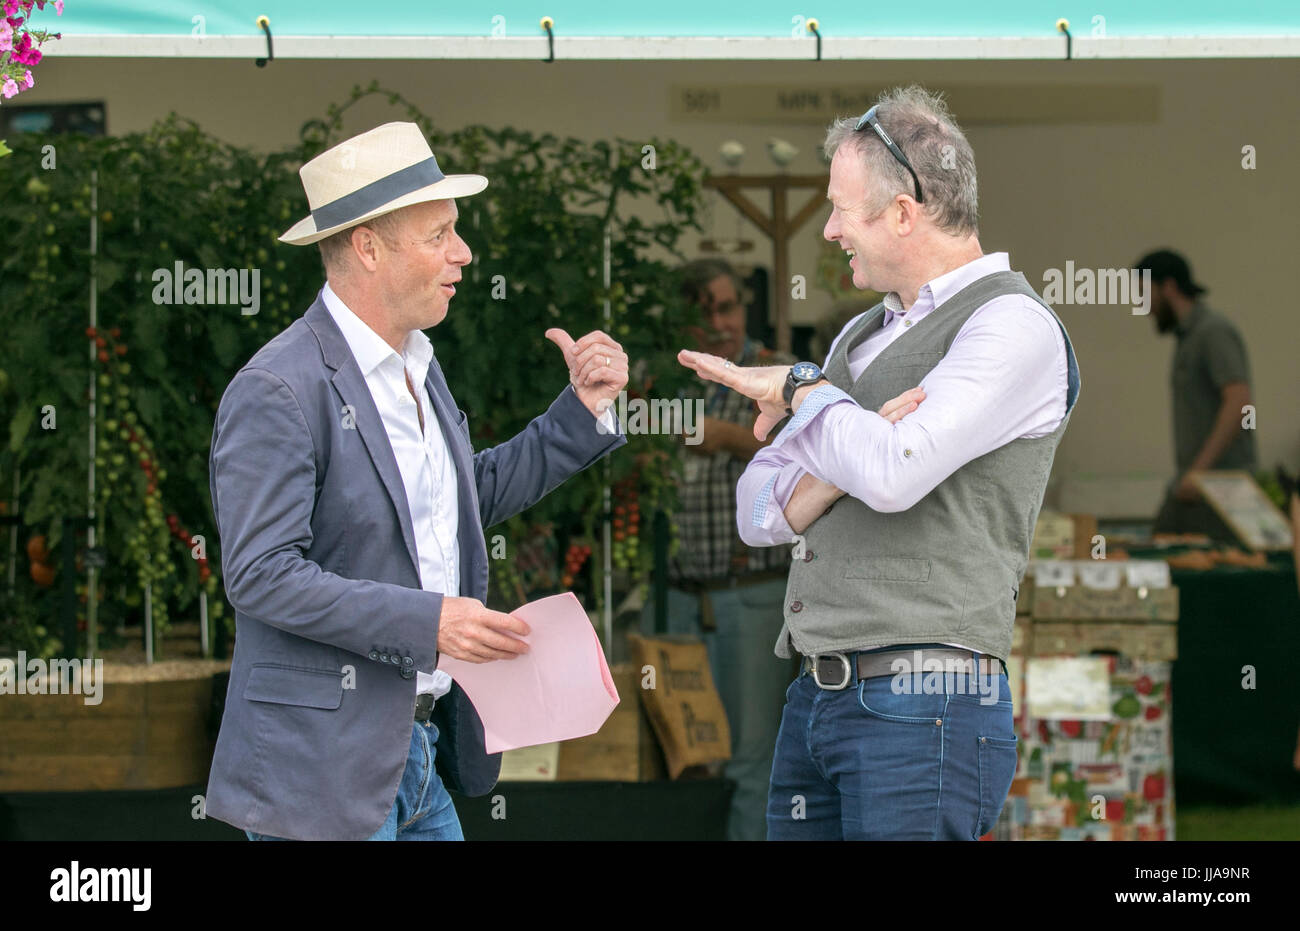 RHS Tatton Park Flower Show, Knutsford, Cheshire. 19th July 2017. Famous celebrity gardeners 'Joe Swift' & 'Toby Buckland' spotted as the gates open on this years floral masterclass at the Royal Horticultural Society's Tatton Park Flower Show 2017. Keen gardeners can immerse themselves in the beauty, fragrance and colour of the Floral Marquee & Plant Village. A new addition to the spectacular gardens on display is the 'Butterfly Dome' where guests can wander through the tropical paradise filled with exotic butterflies. Credit: Cernan Elias/Alamy Live News Stock Photo